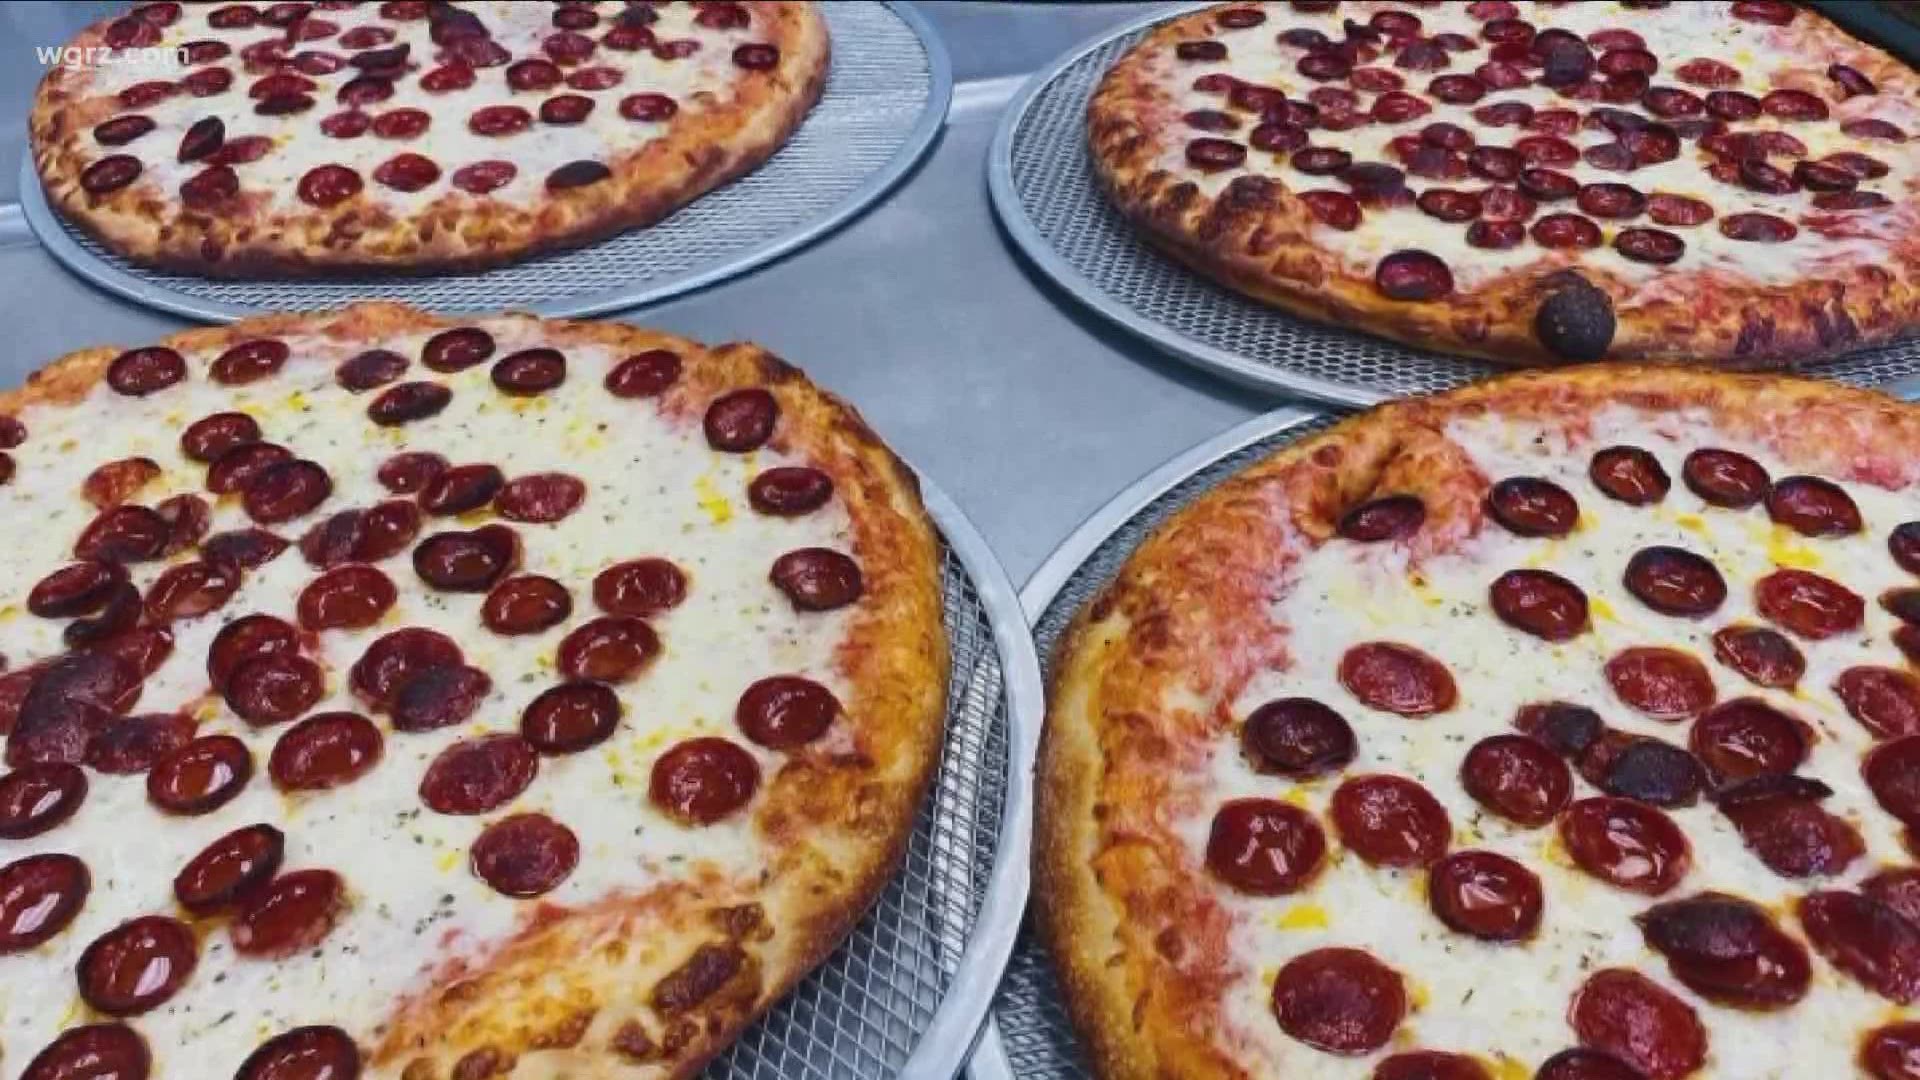 Weekends 'Like Super Bowl' at pizza places